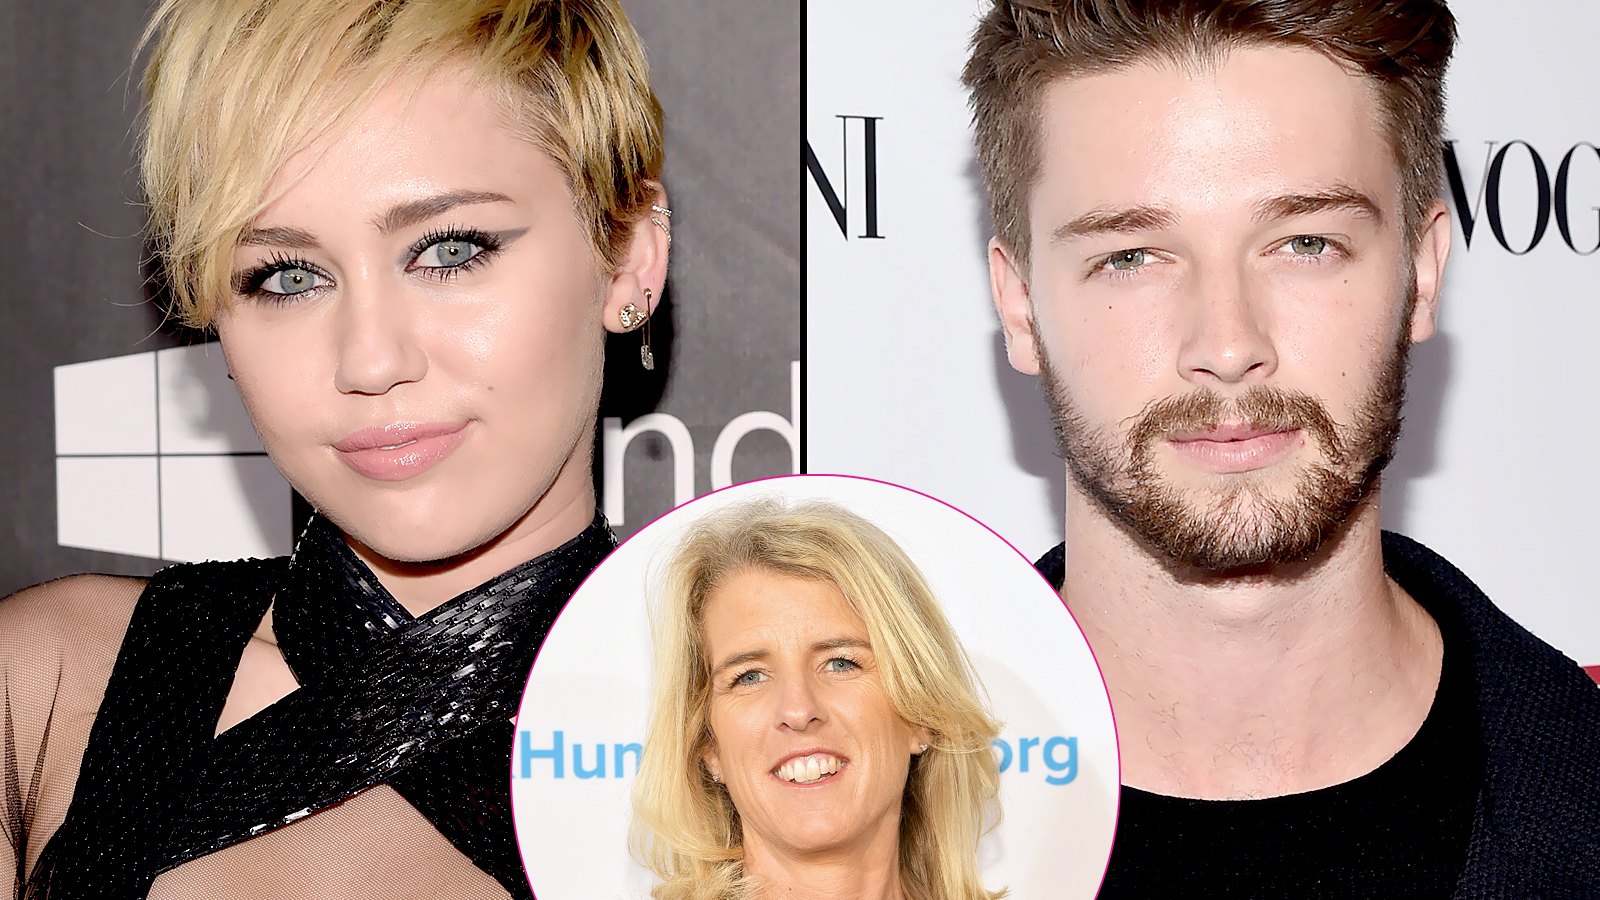 Miley Cyrus, Patrick Schwarzenegger and Rory Kennedy